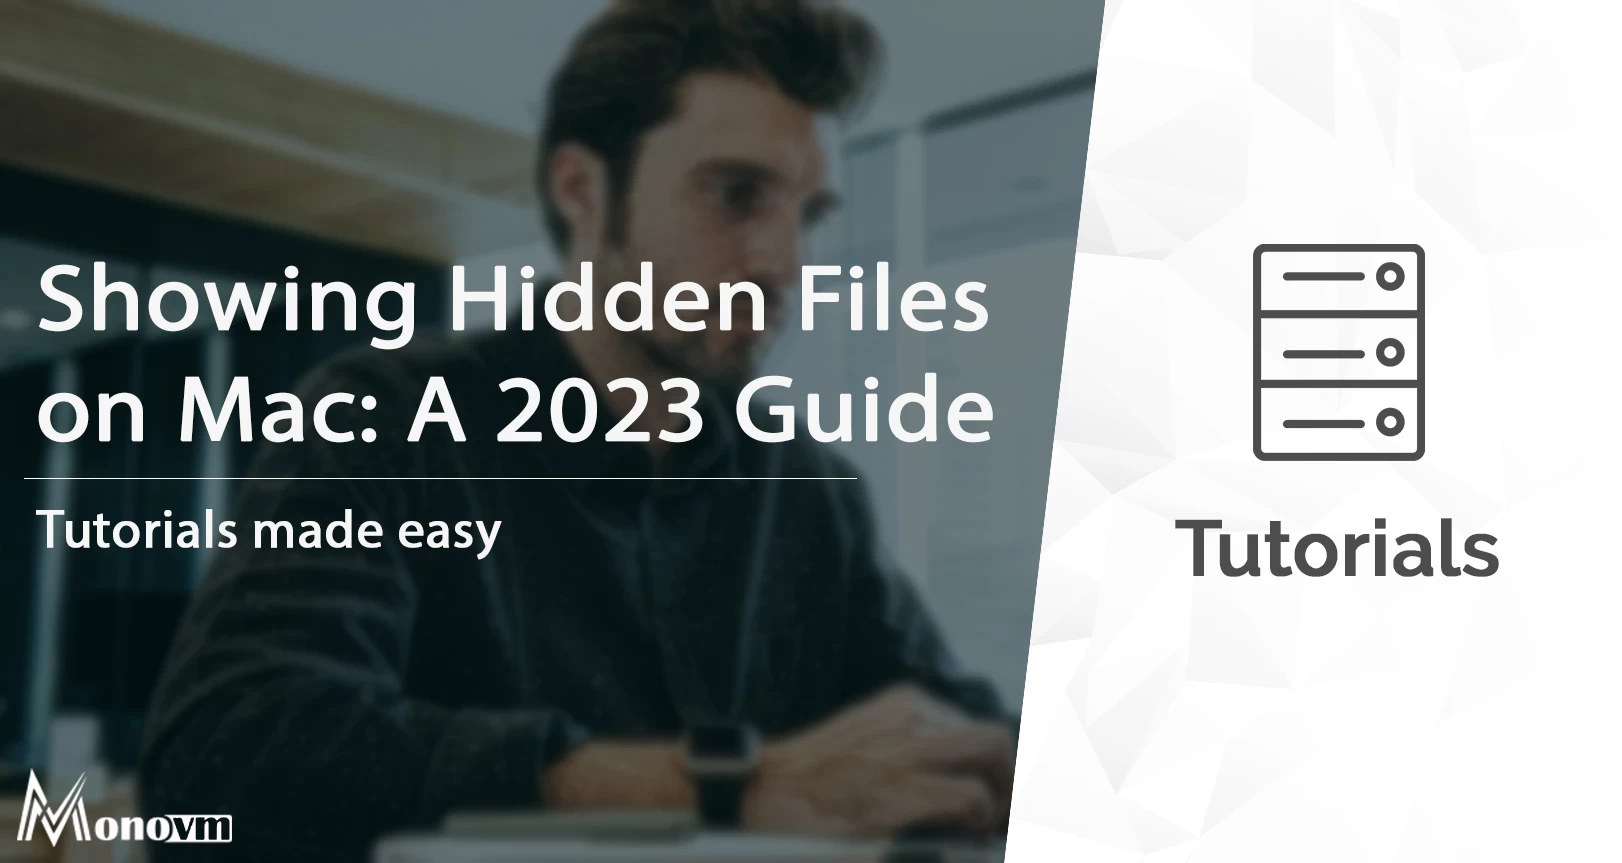 Showing Hidden Files on Mac: A 2023 Guide